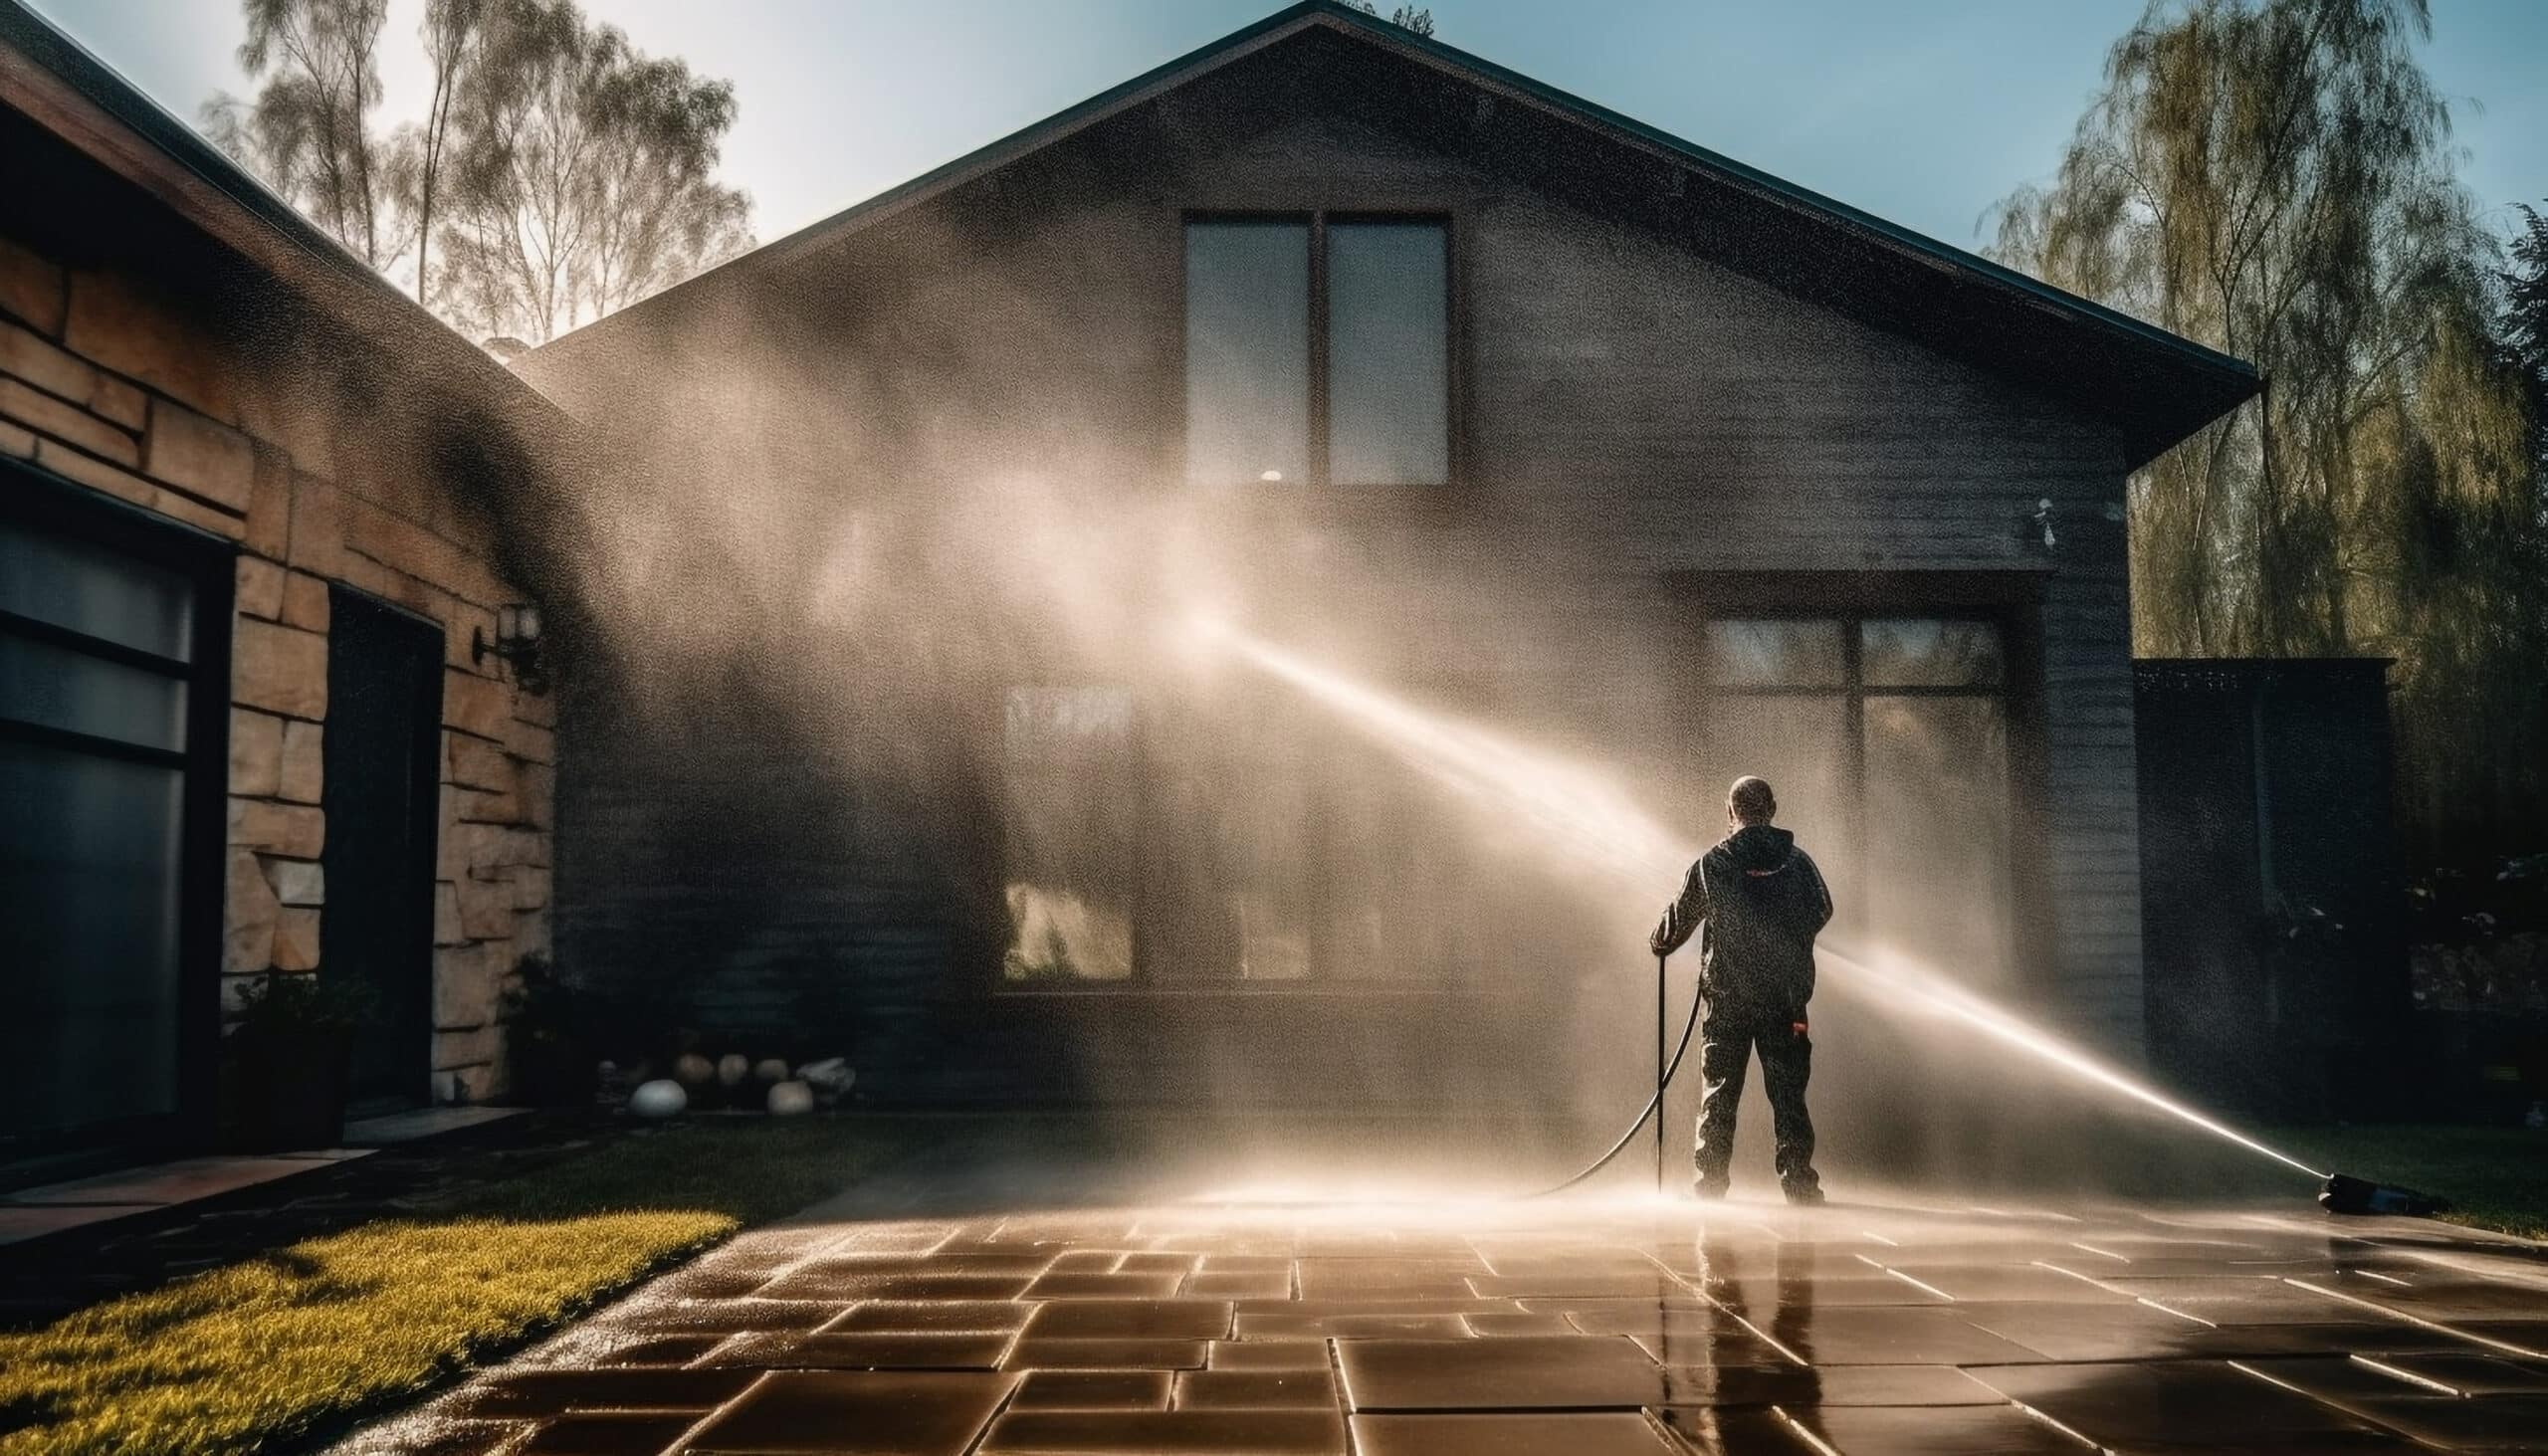 www.appr.com : Are there any safety certifications I should look for when buying a pressure washer?